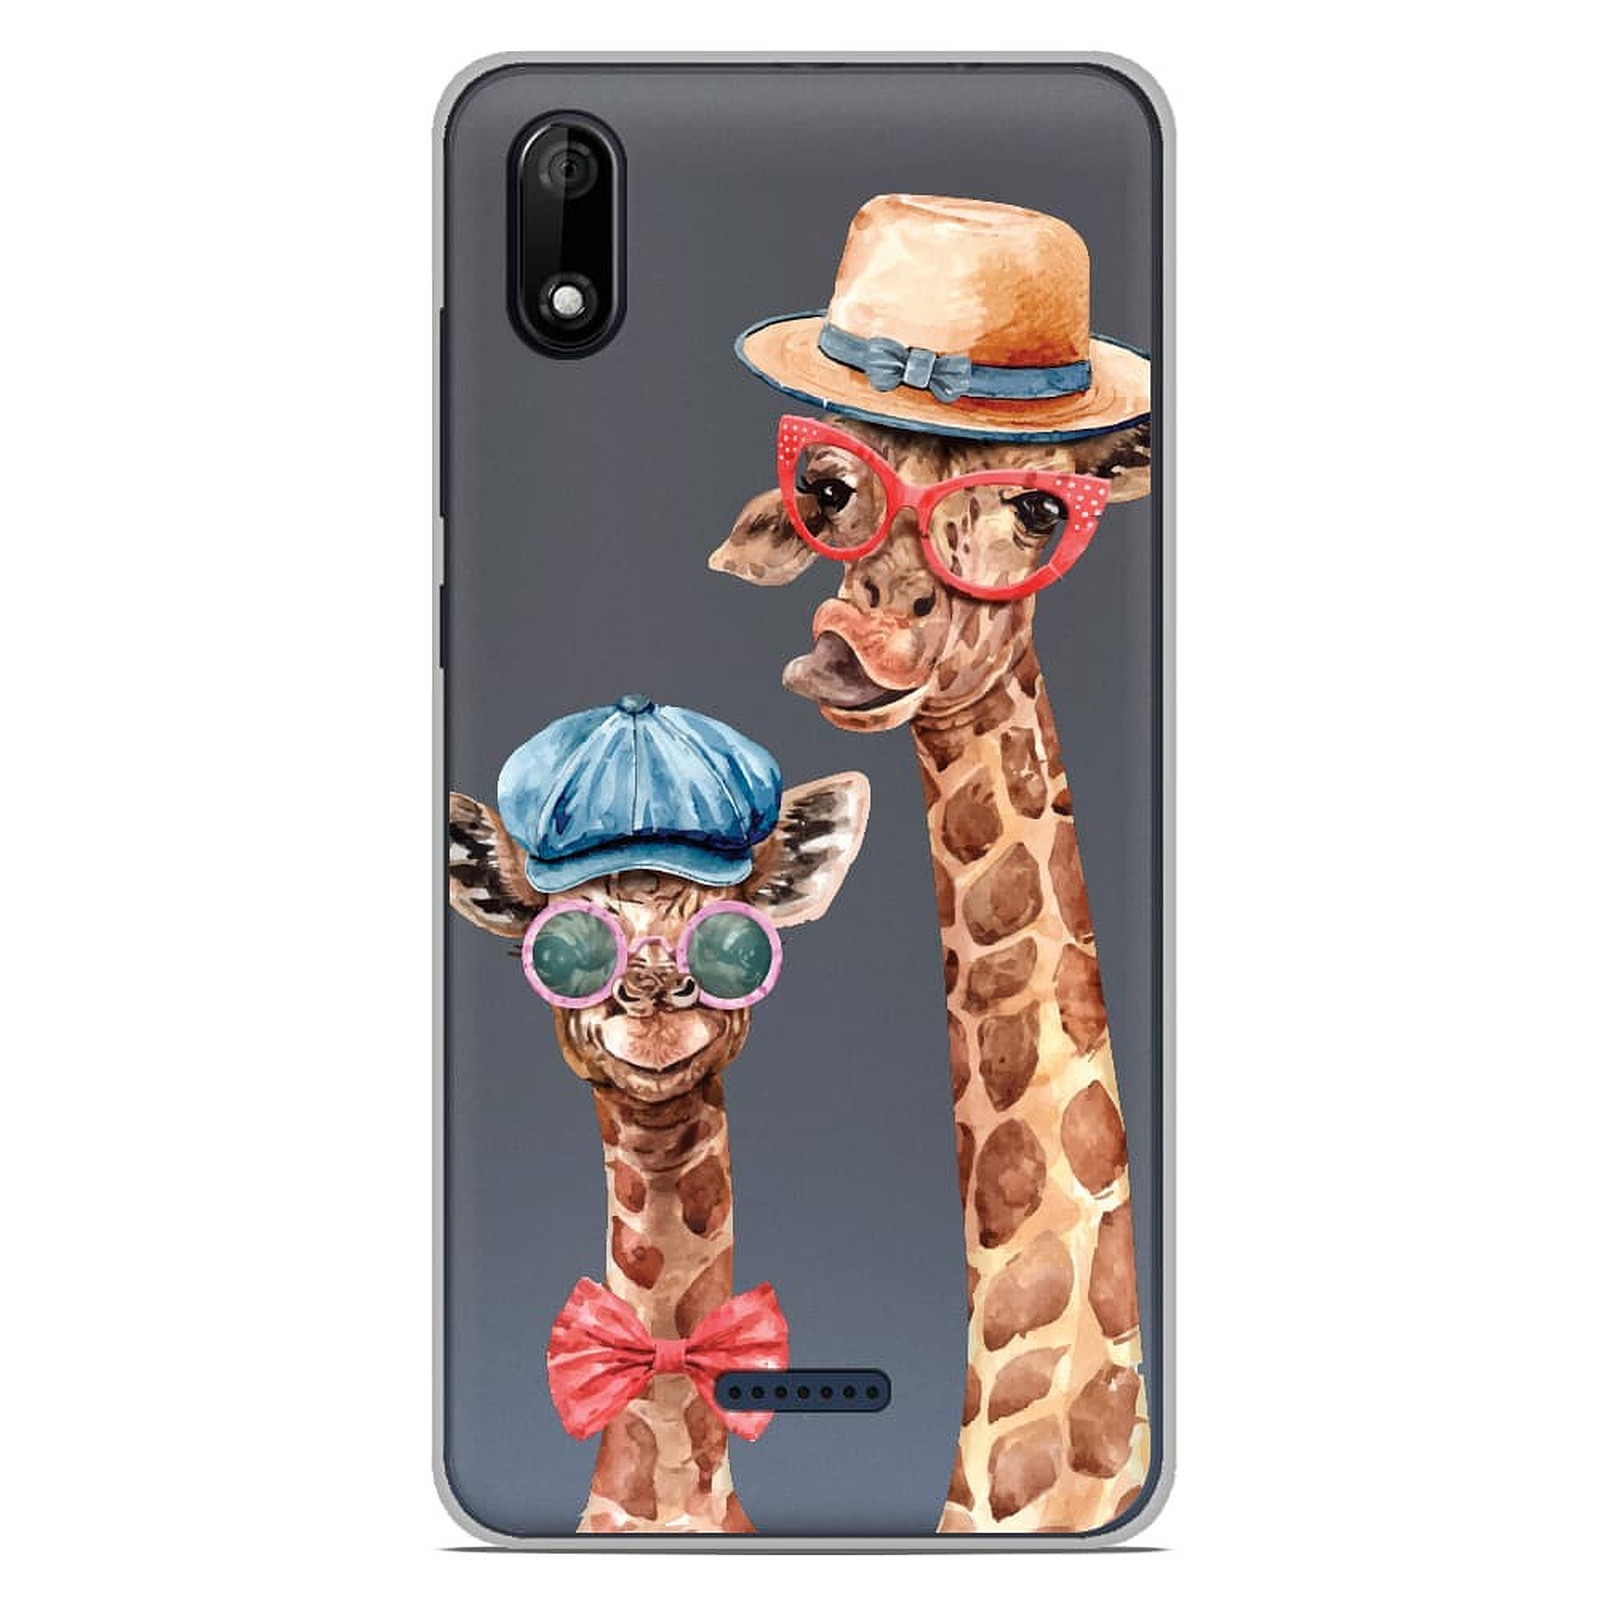 1001 Coques Coque silicone gel Wiko Y50 motif Funny Girafe - Coque telephone 1001Coques